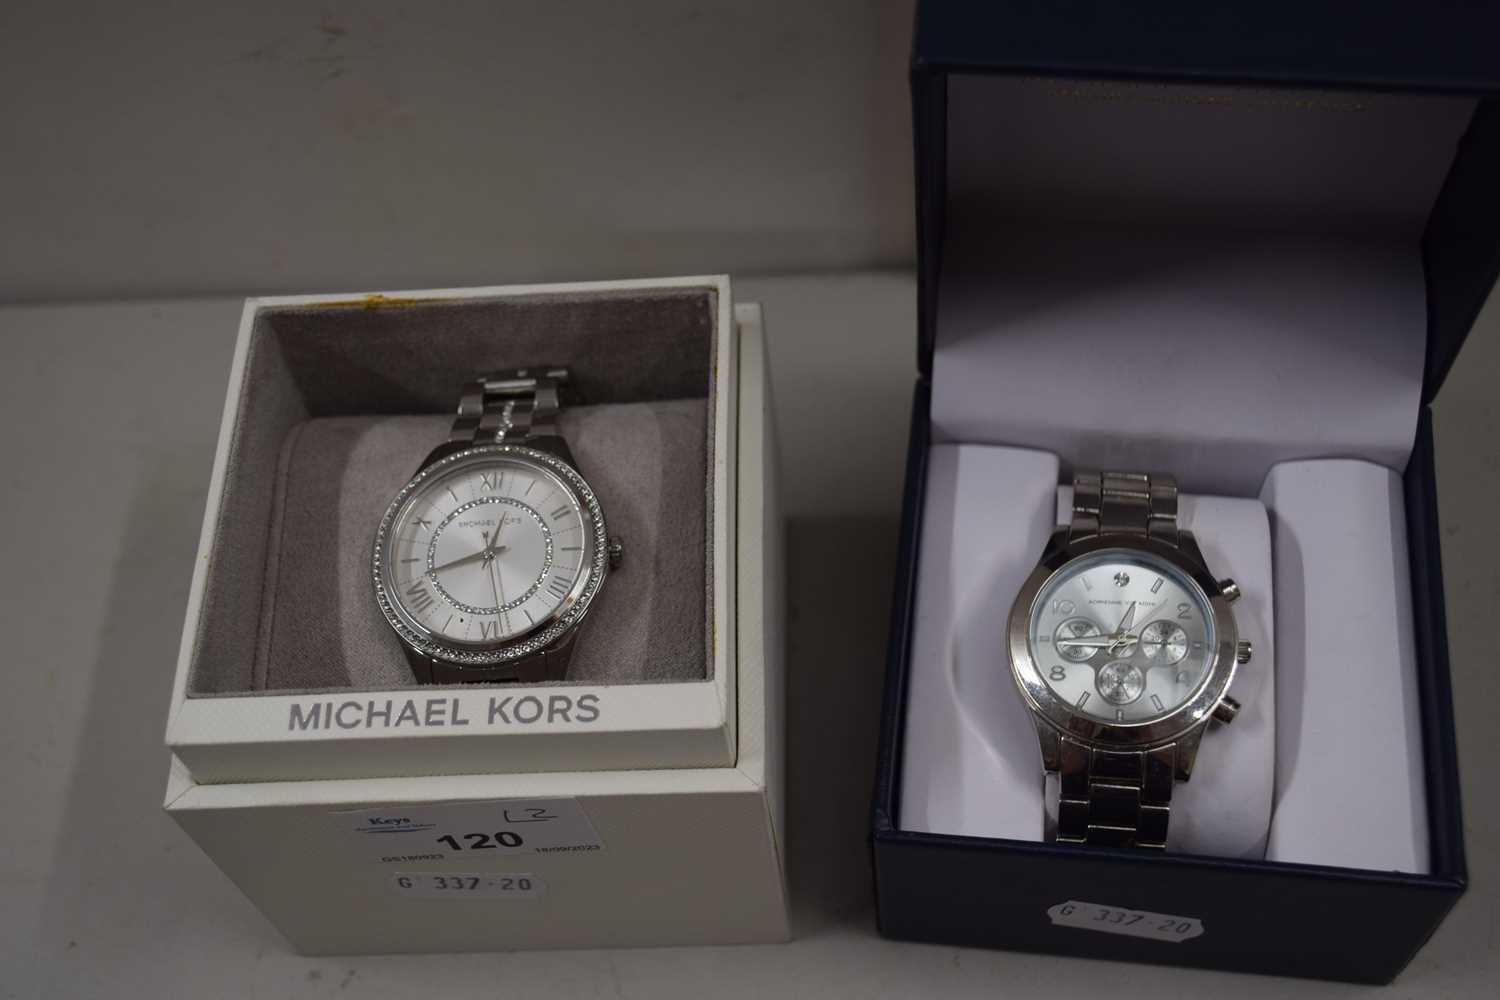 Michael Kors quartz gents wristwatch together with another marked Vittadini